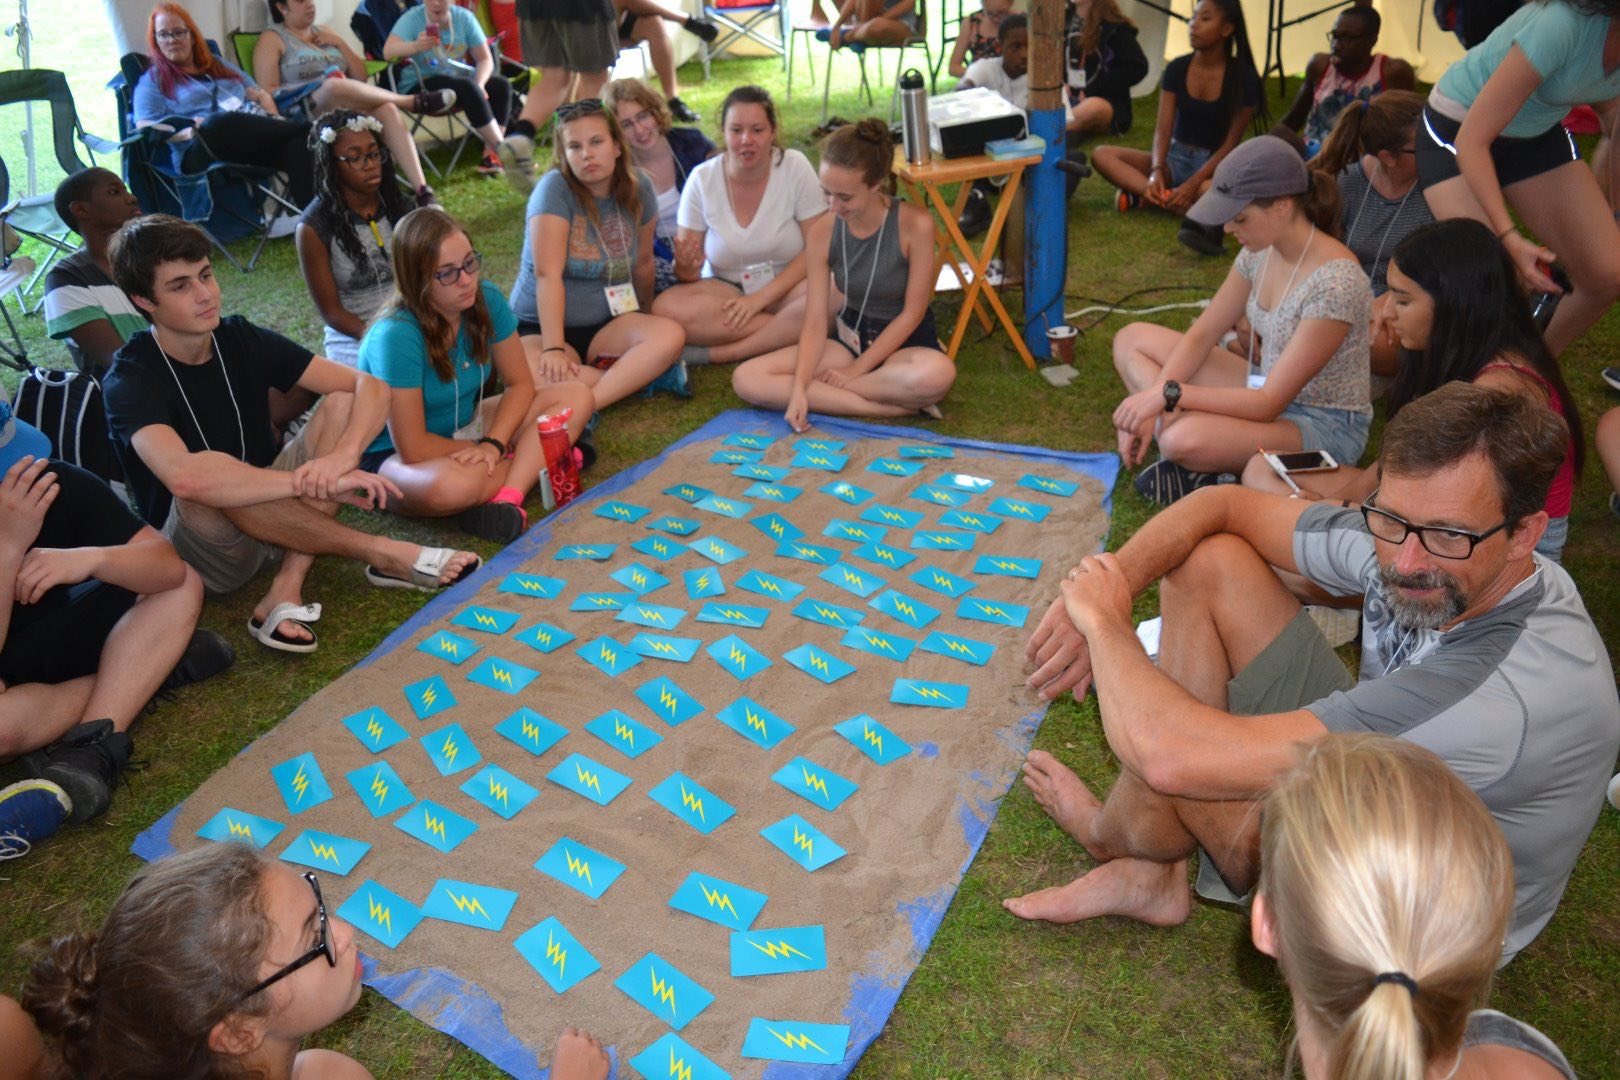 The cards on the table were used throughout the week to pair people up for various activities. Photo: Diocesan website